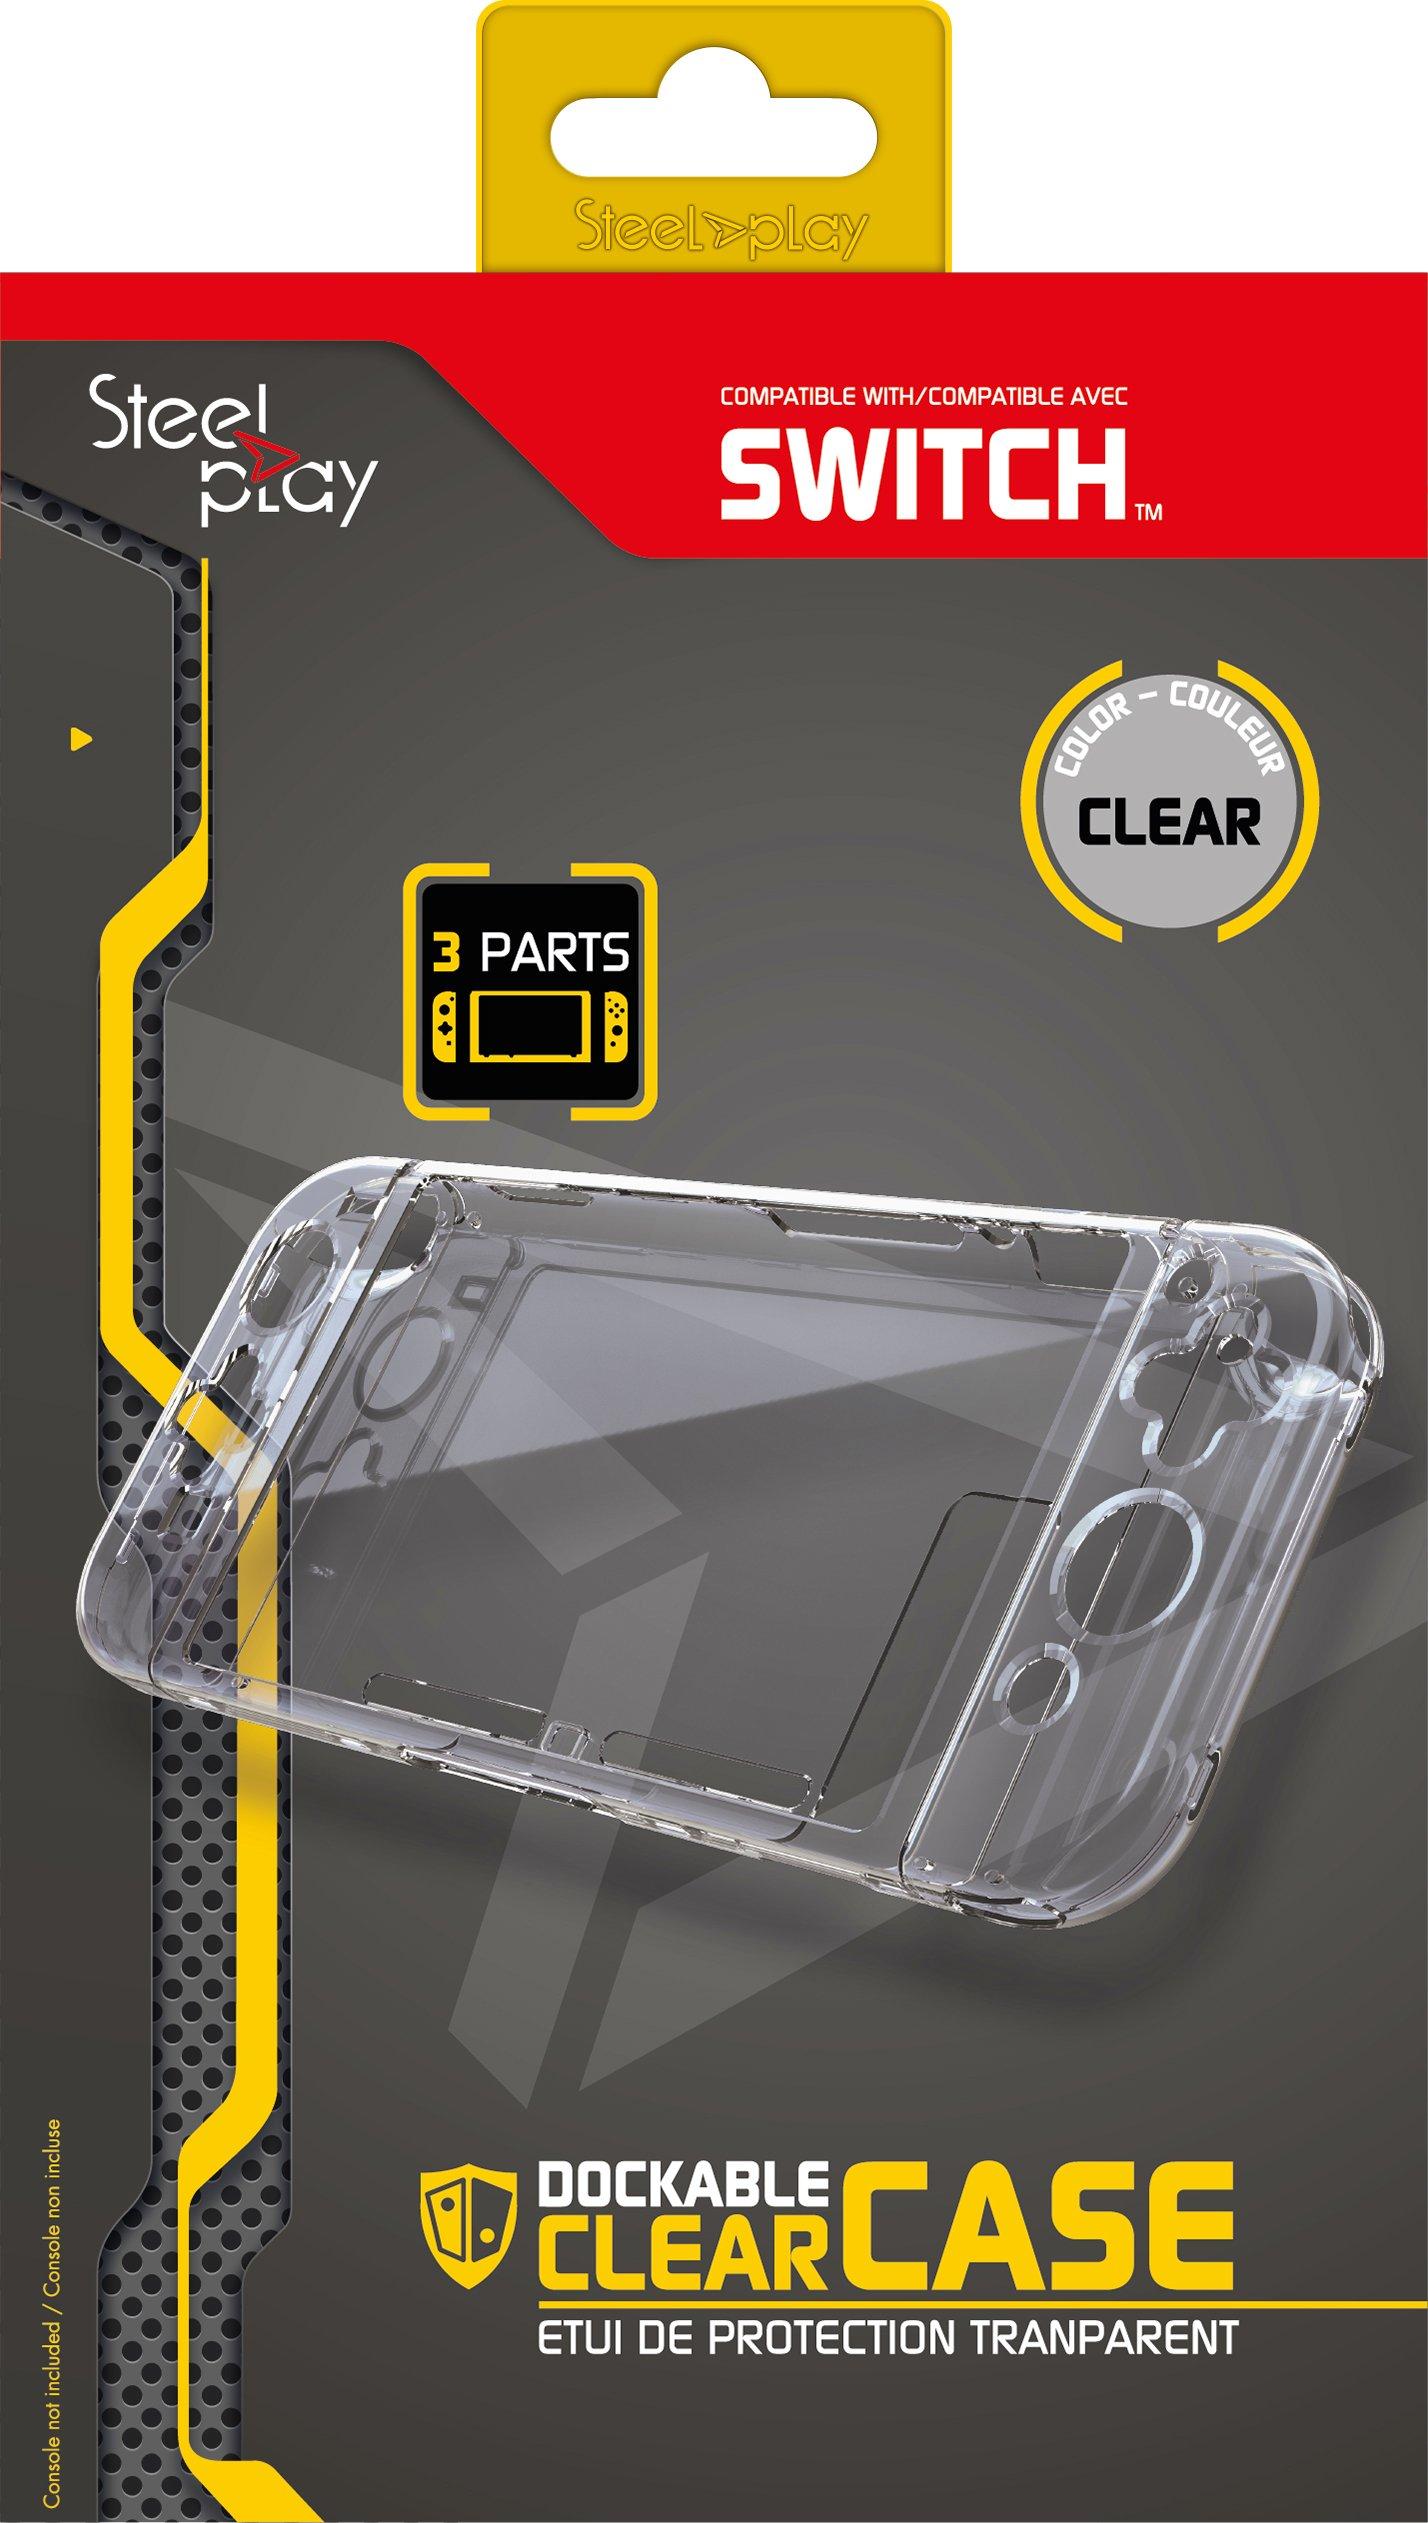 Dockable Clear Case for Nintendo Switch 